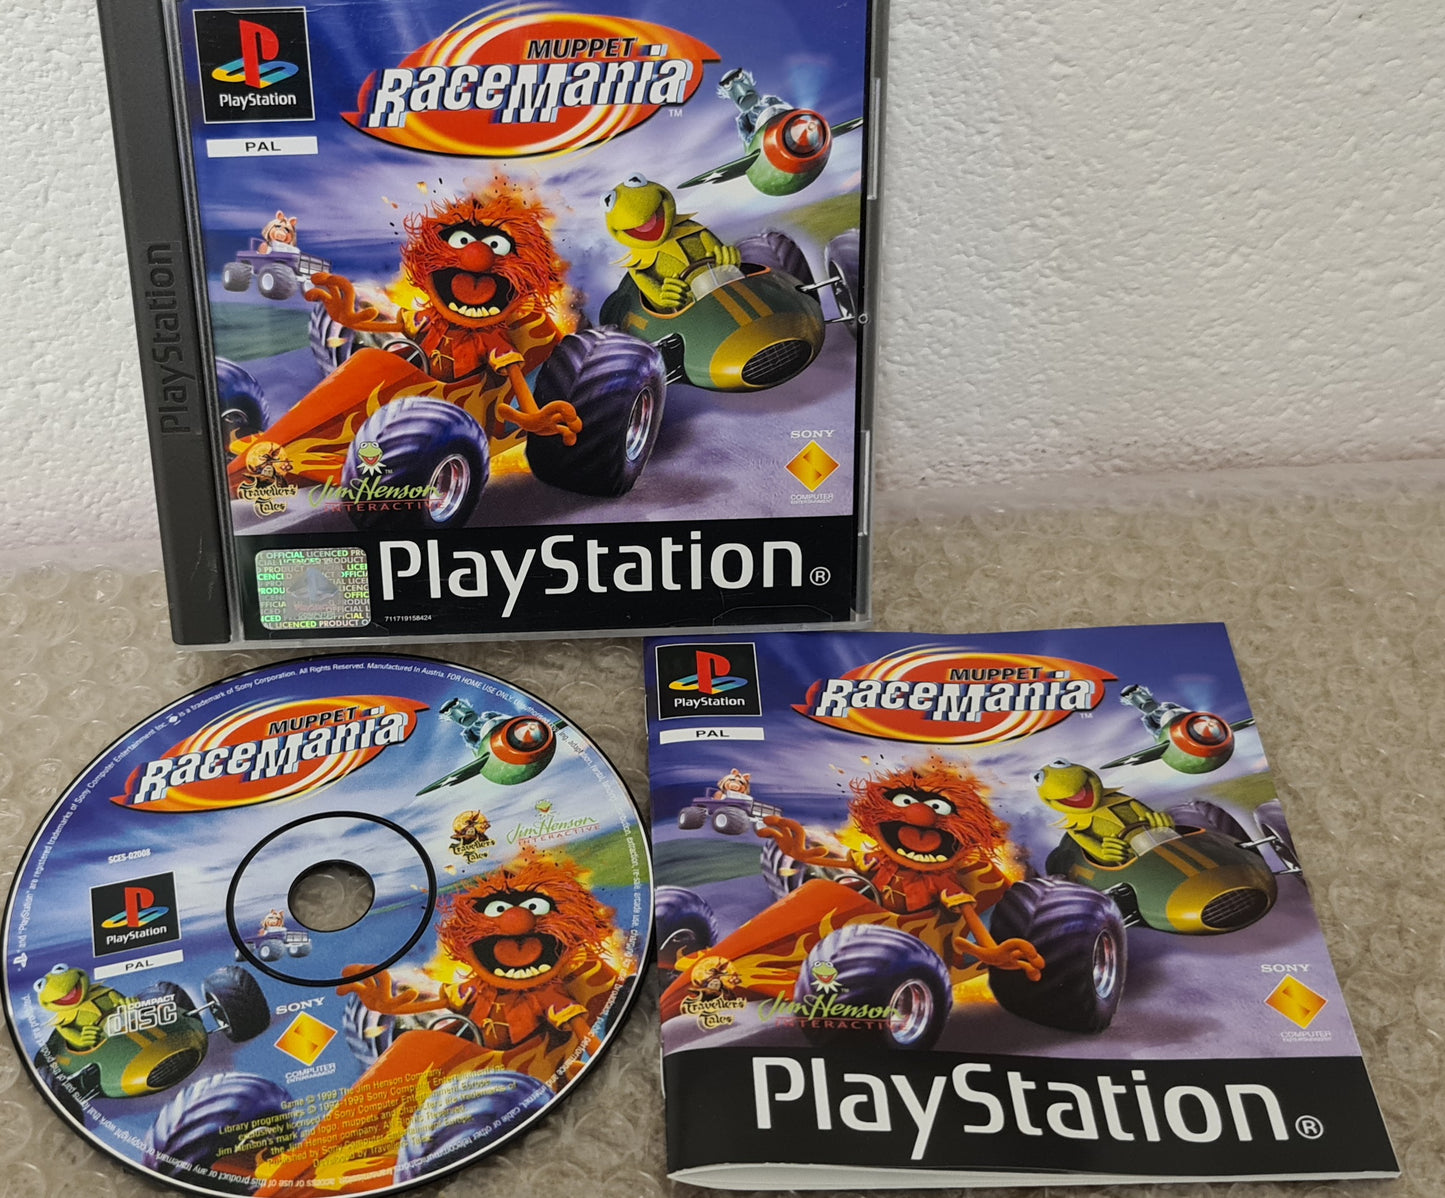 Muppet Racemania Sony Playstation 1 (PS1) Game